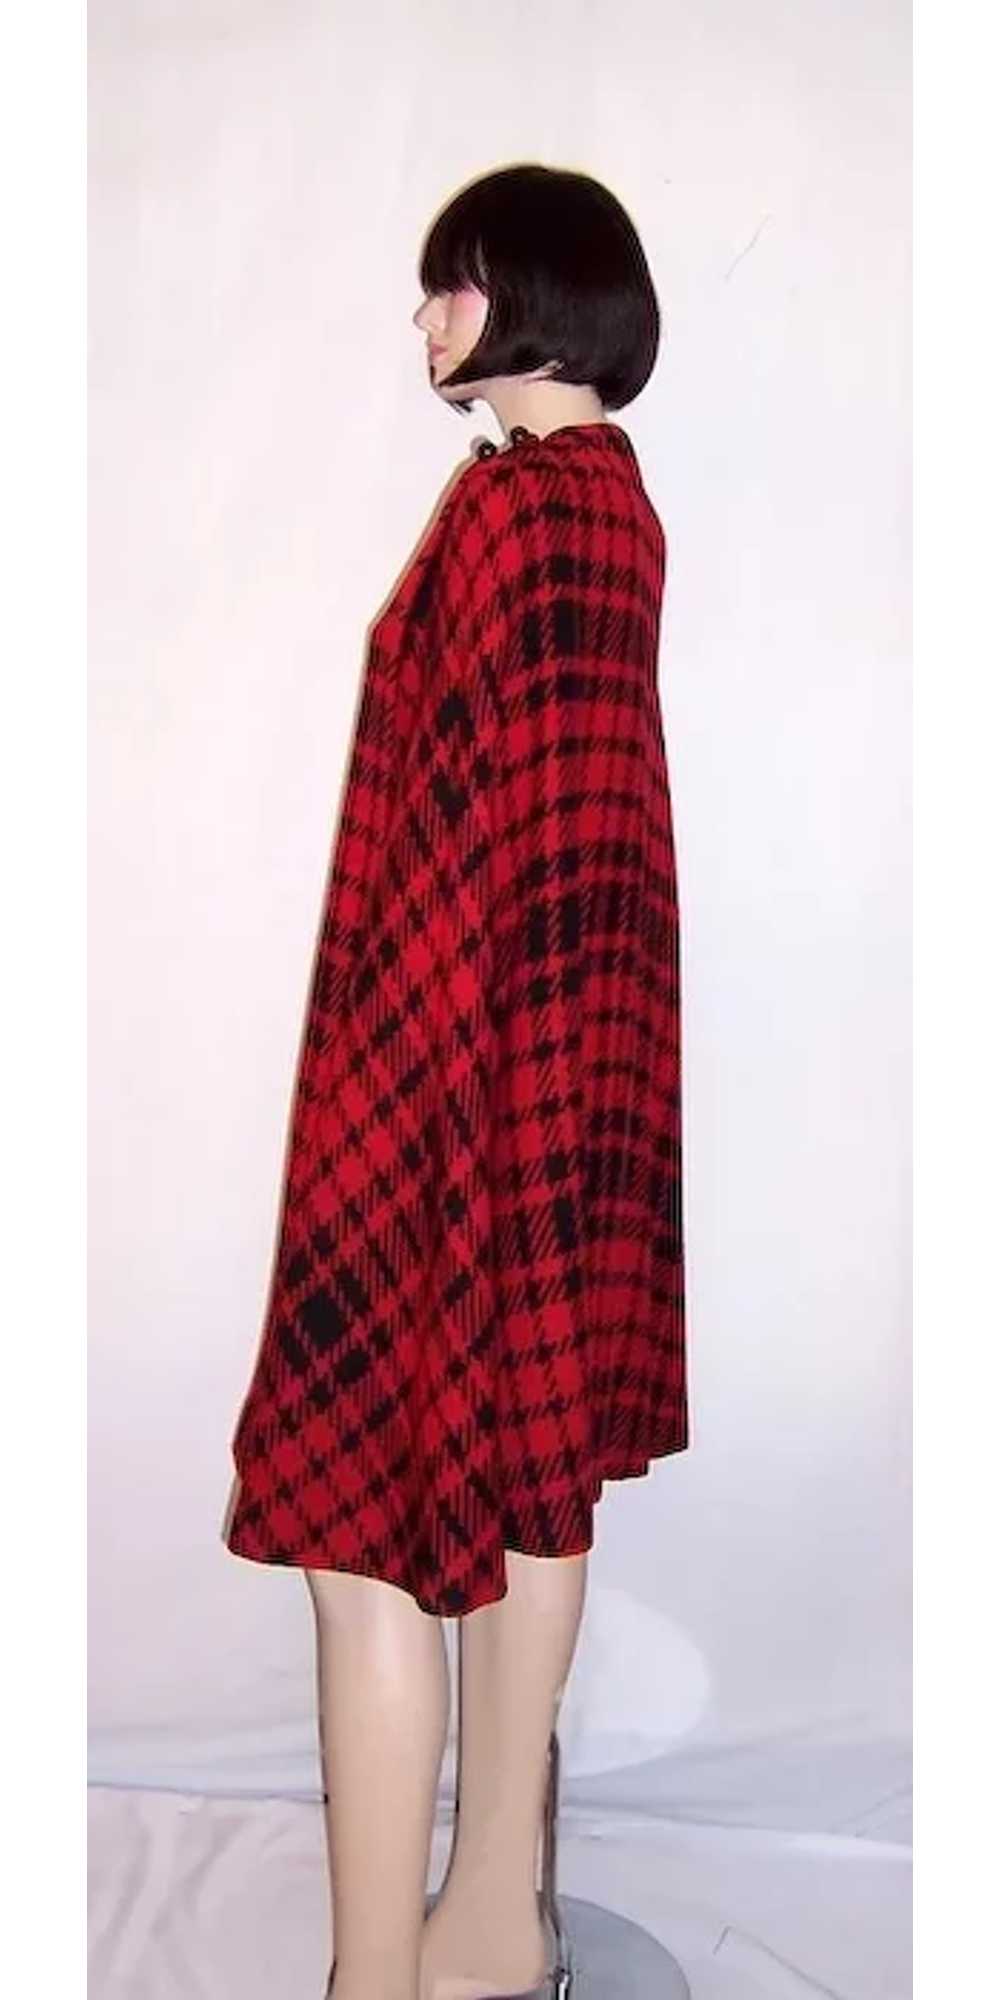 1960's Black and Red Plaid Cape and Skirt Ensemble - image 2